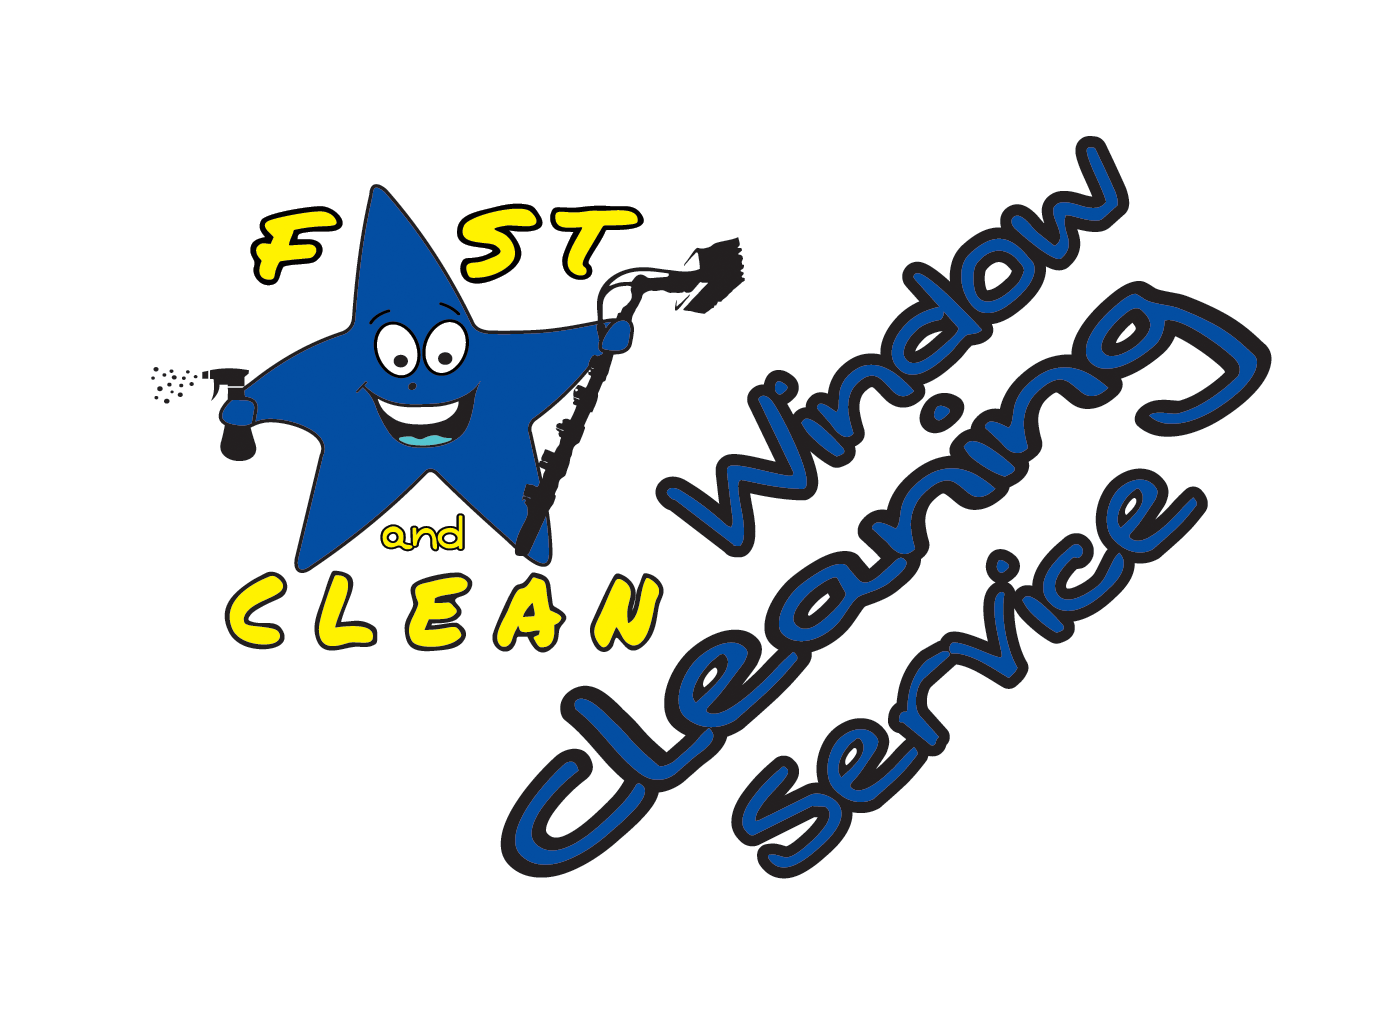 𝙁𝘼𝙎𝙏 𝘼𝙉𝘿 𝘾𝙇𝙀𝘼𝙉 - Window Cleaning Service